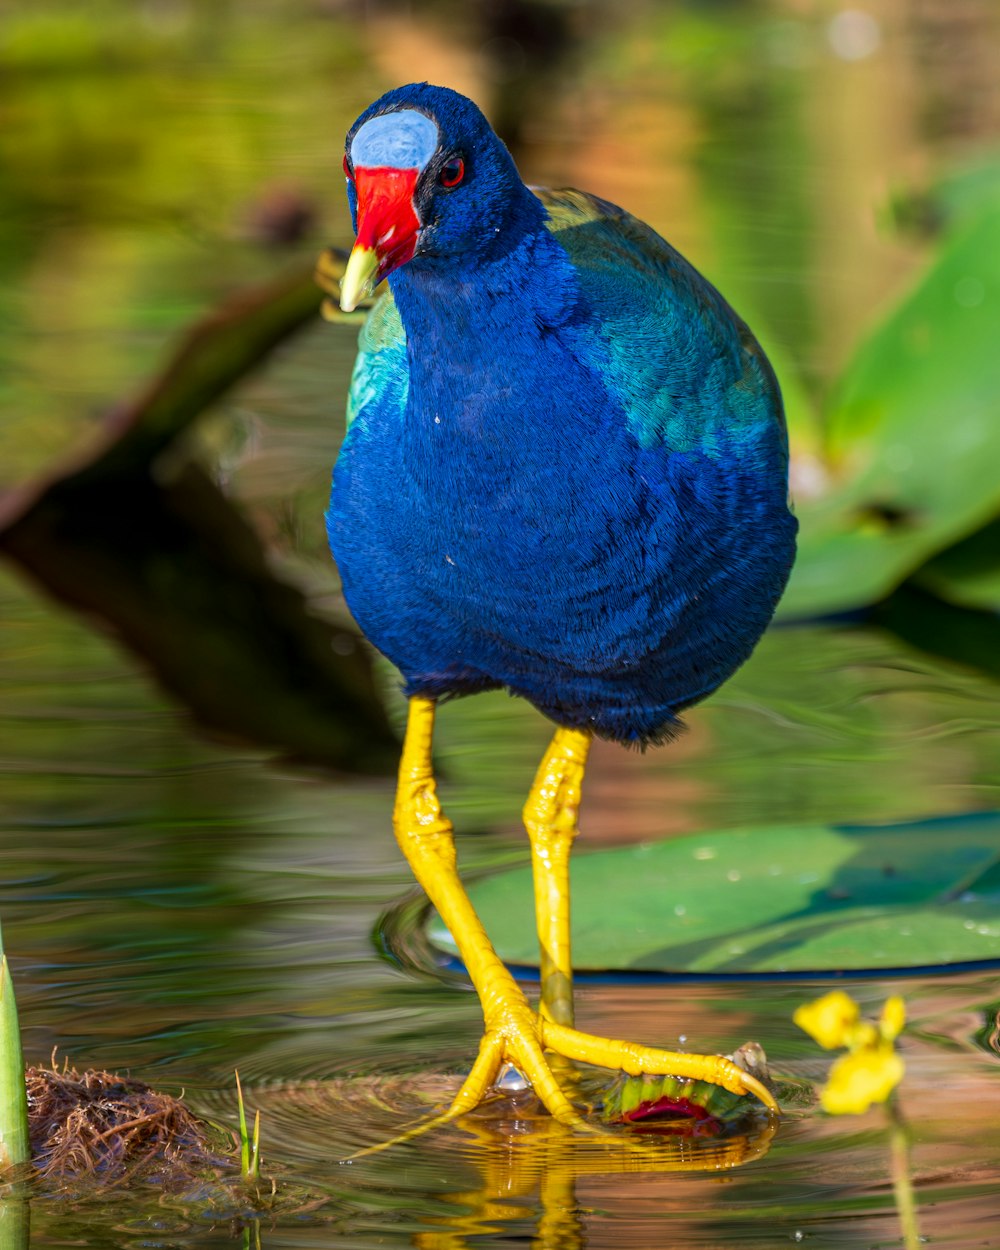 a blue bird with a red beak standing in water